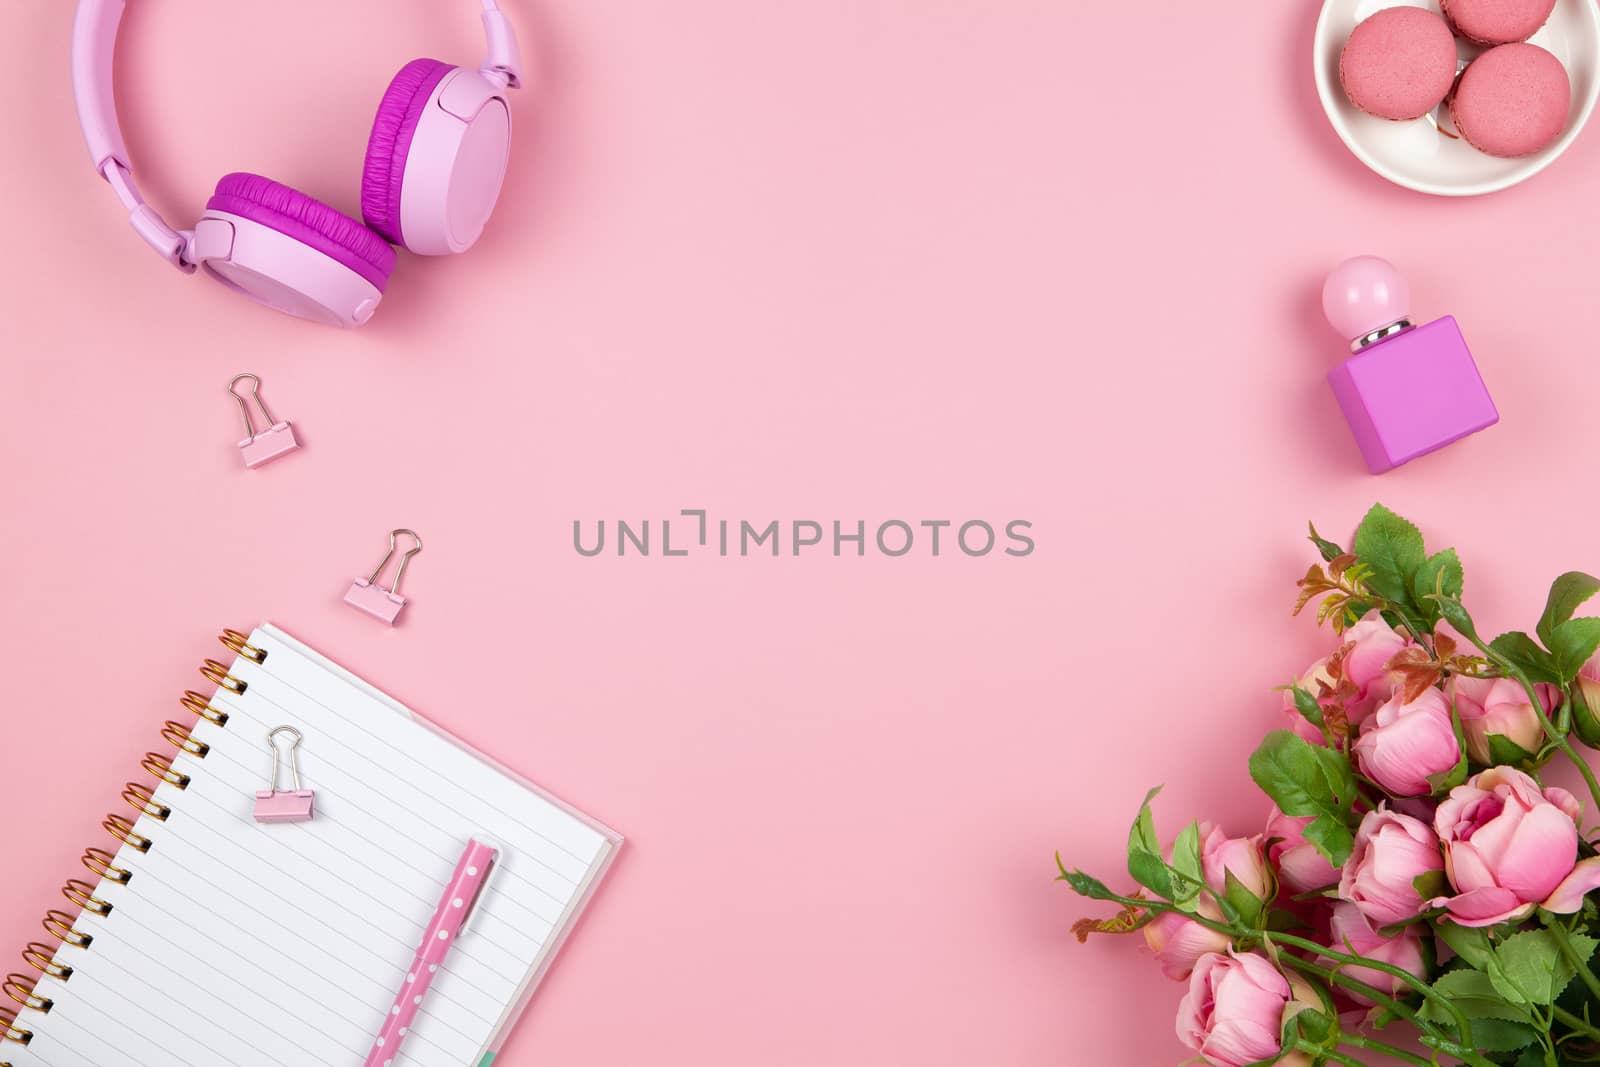 Modern female working space, top view. Women's or girls things, wireless headphones, roses, perfume, stationery on pink backround, copy space, flat lay. Work from home concept. For blog. Horizontal.